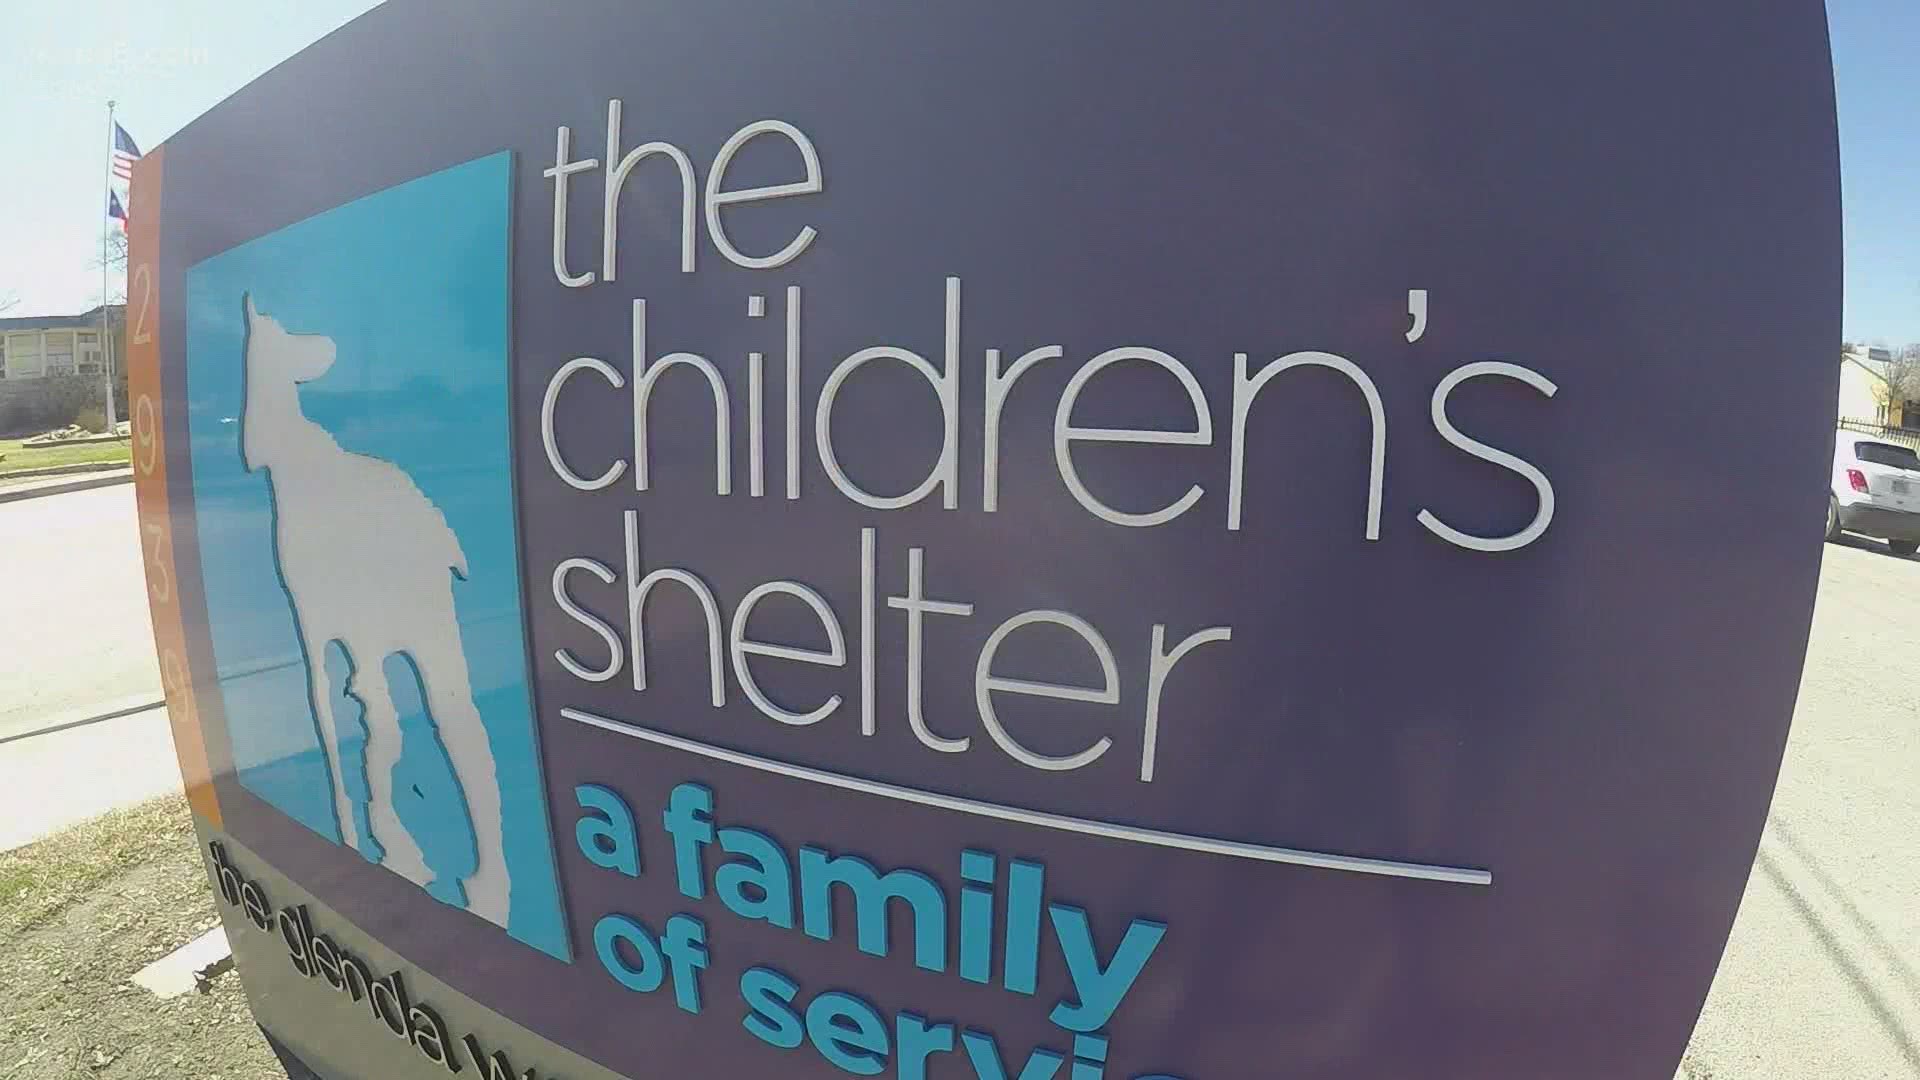 The shelter has been a staple of the San Antonio area for over a century.